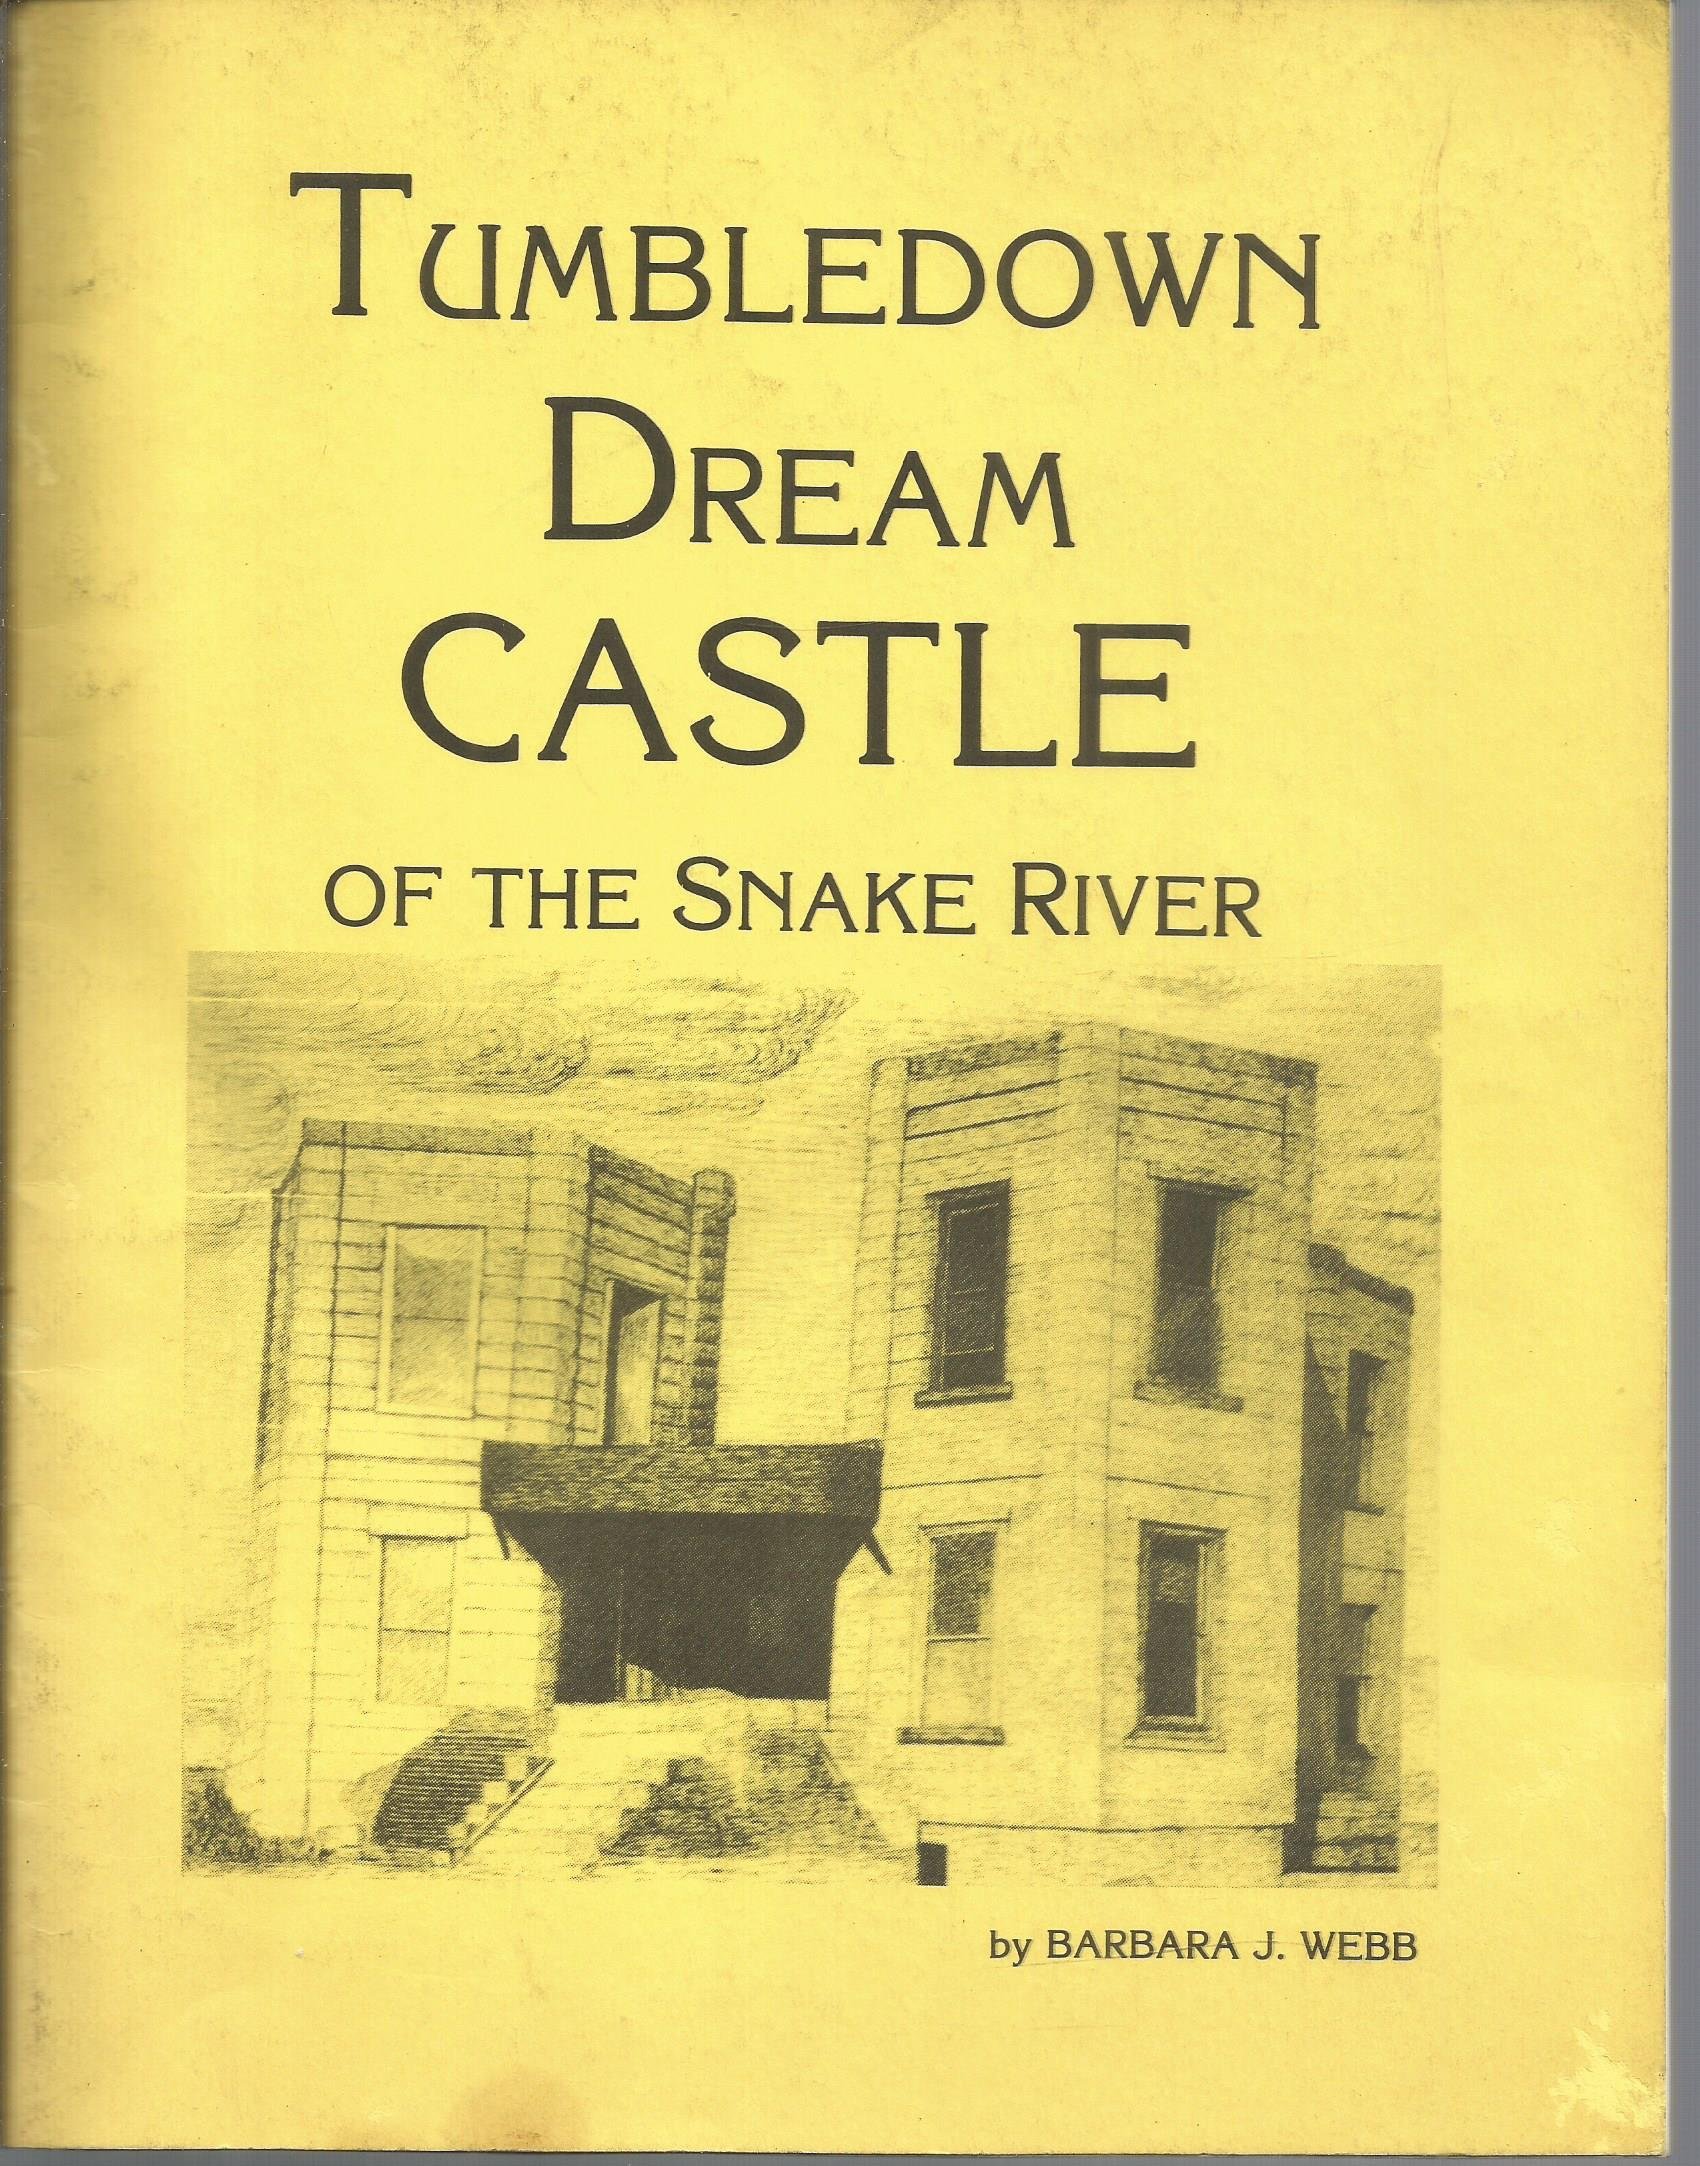 Tumbledown dream castle of the Snake River (book cover)